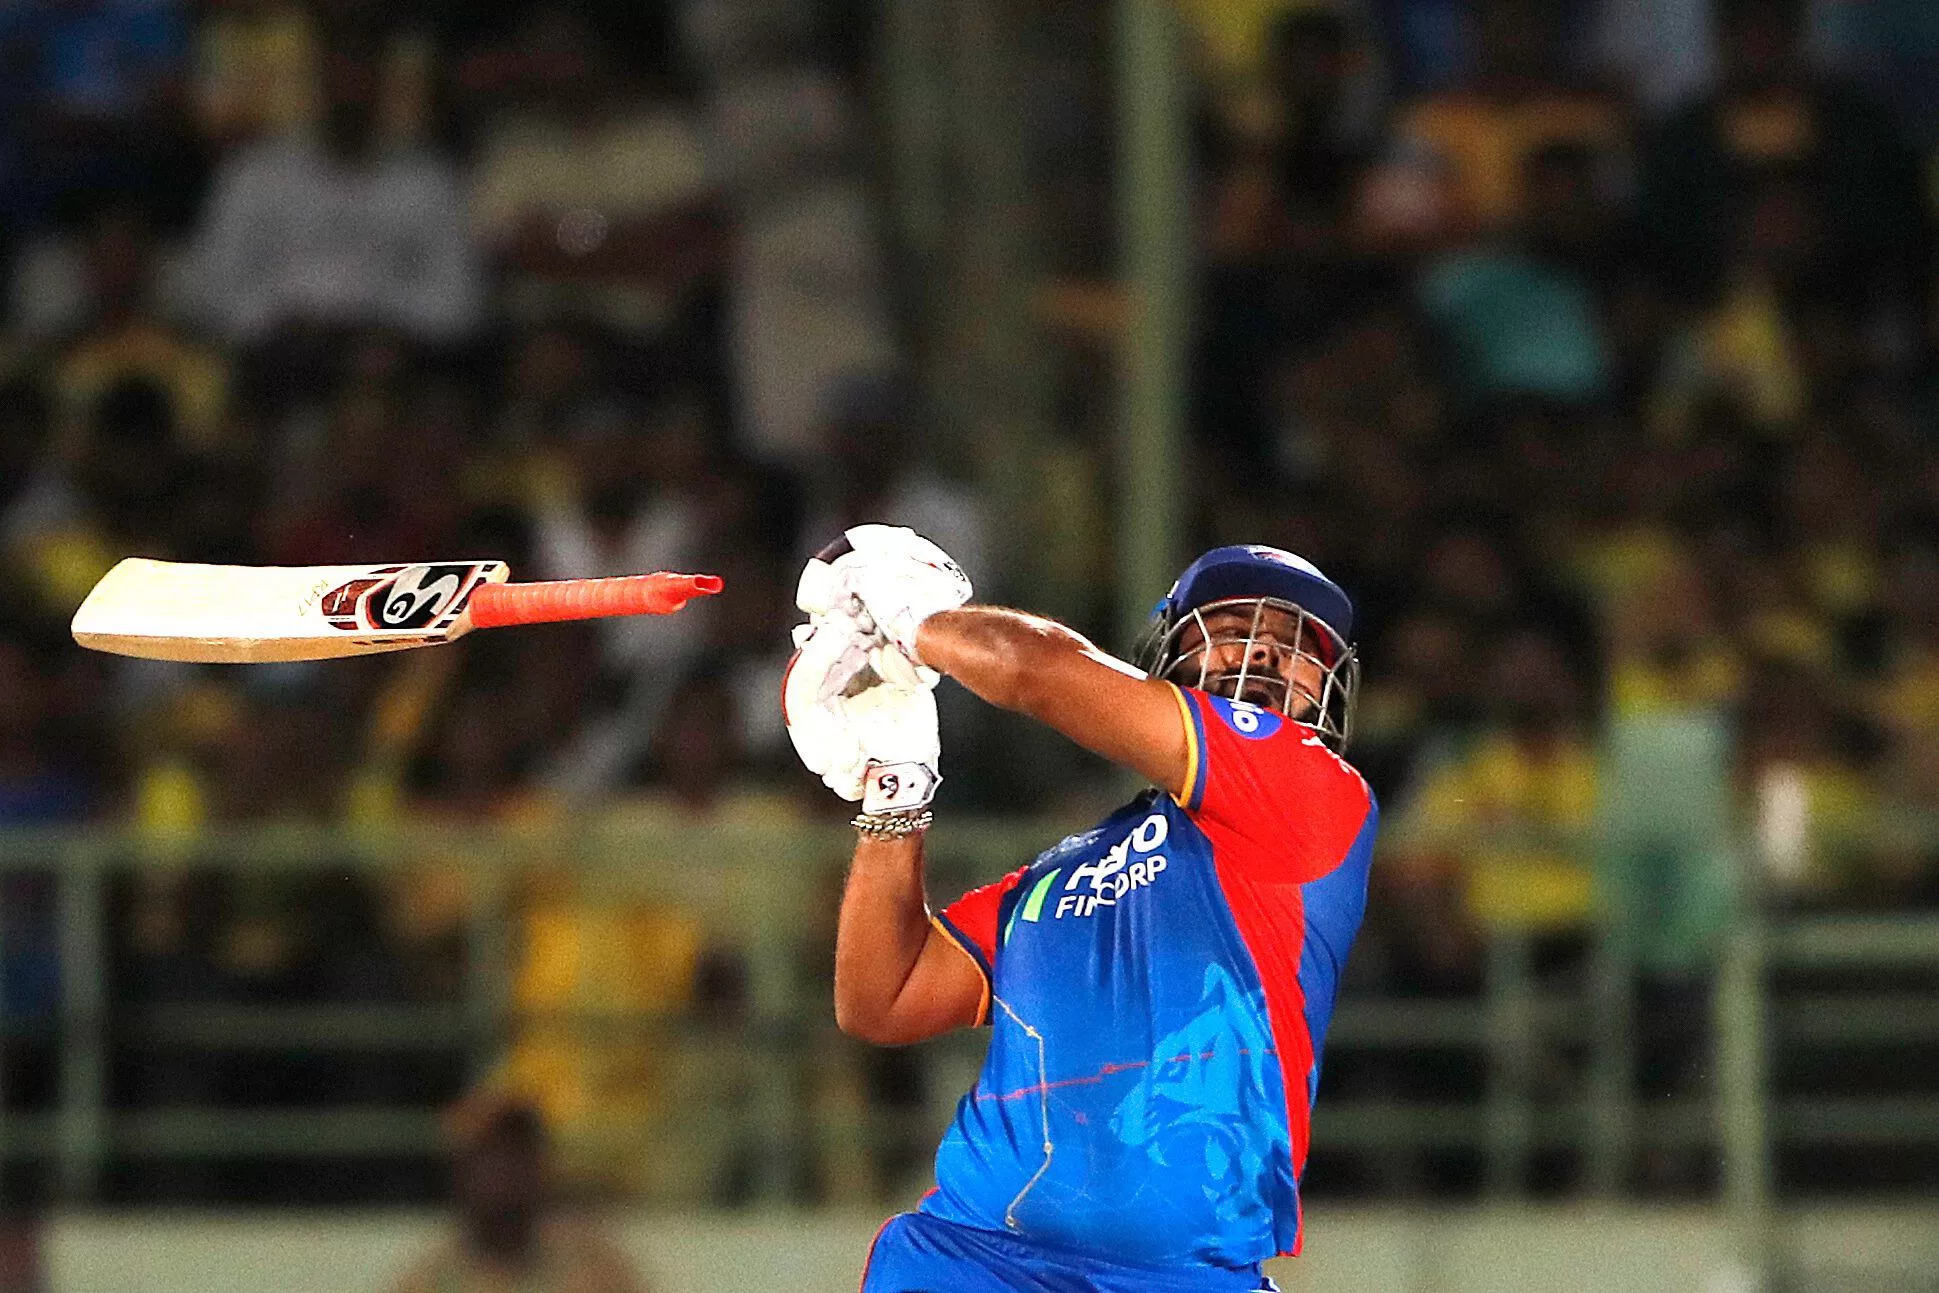 After smashing comeback 50, Rishabh Pant fined by IPL for code of conduct breach vs CSK